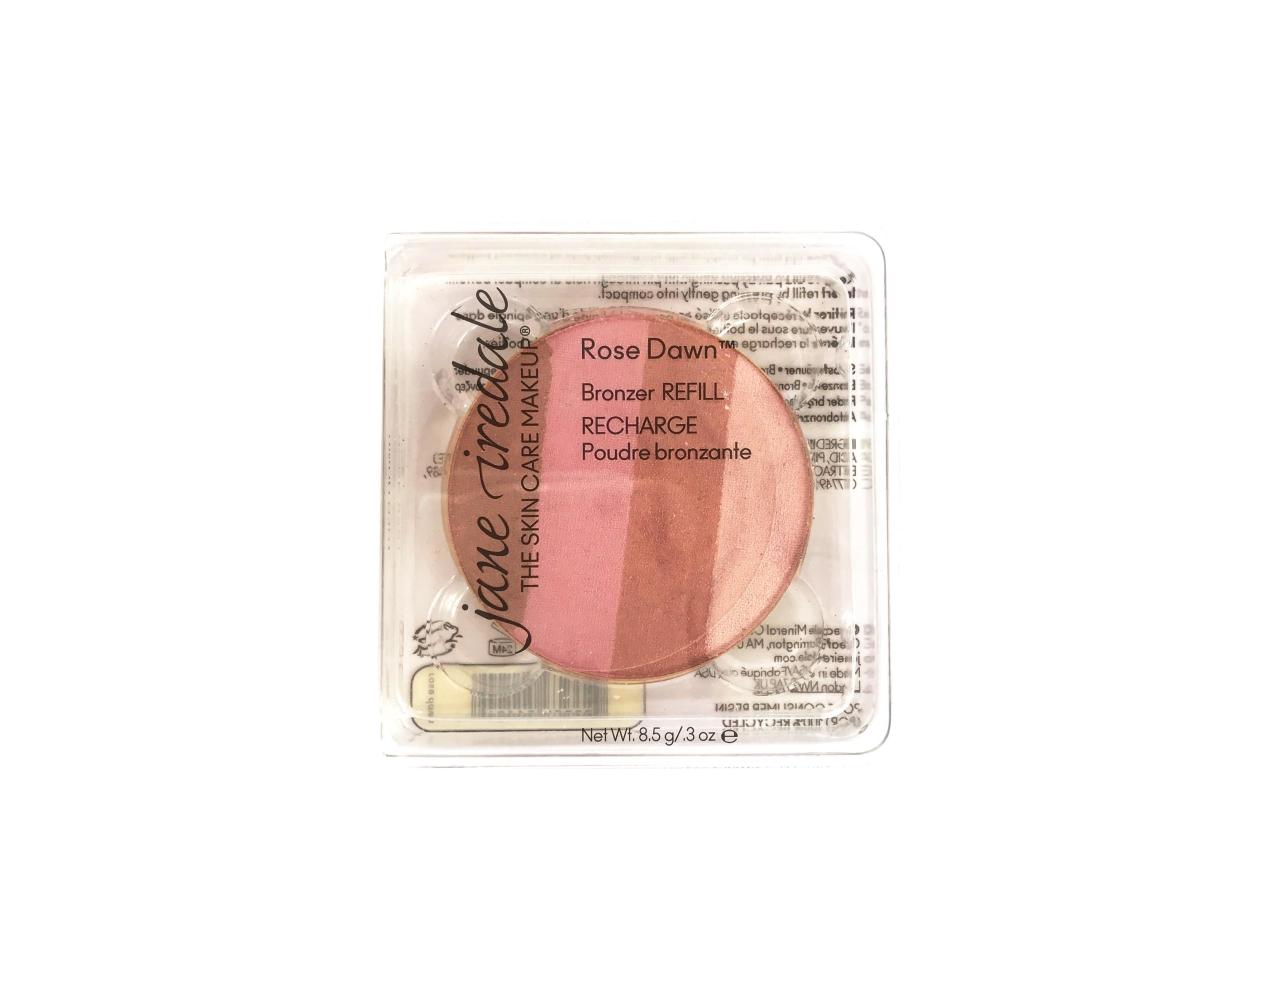 Jane Iredale Rose Dawn Bronzer Refill Recharge 8.5 g